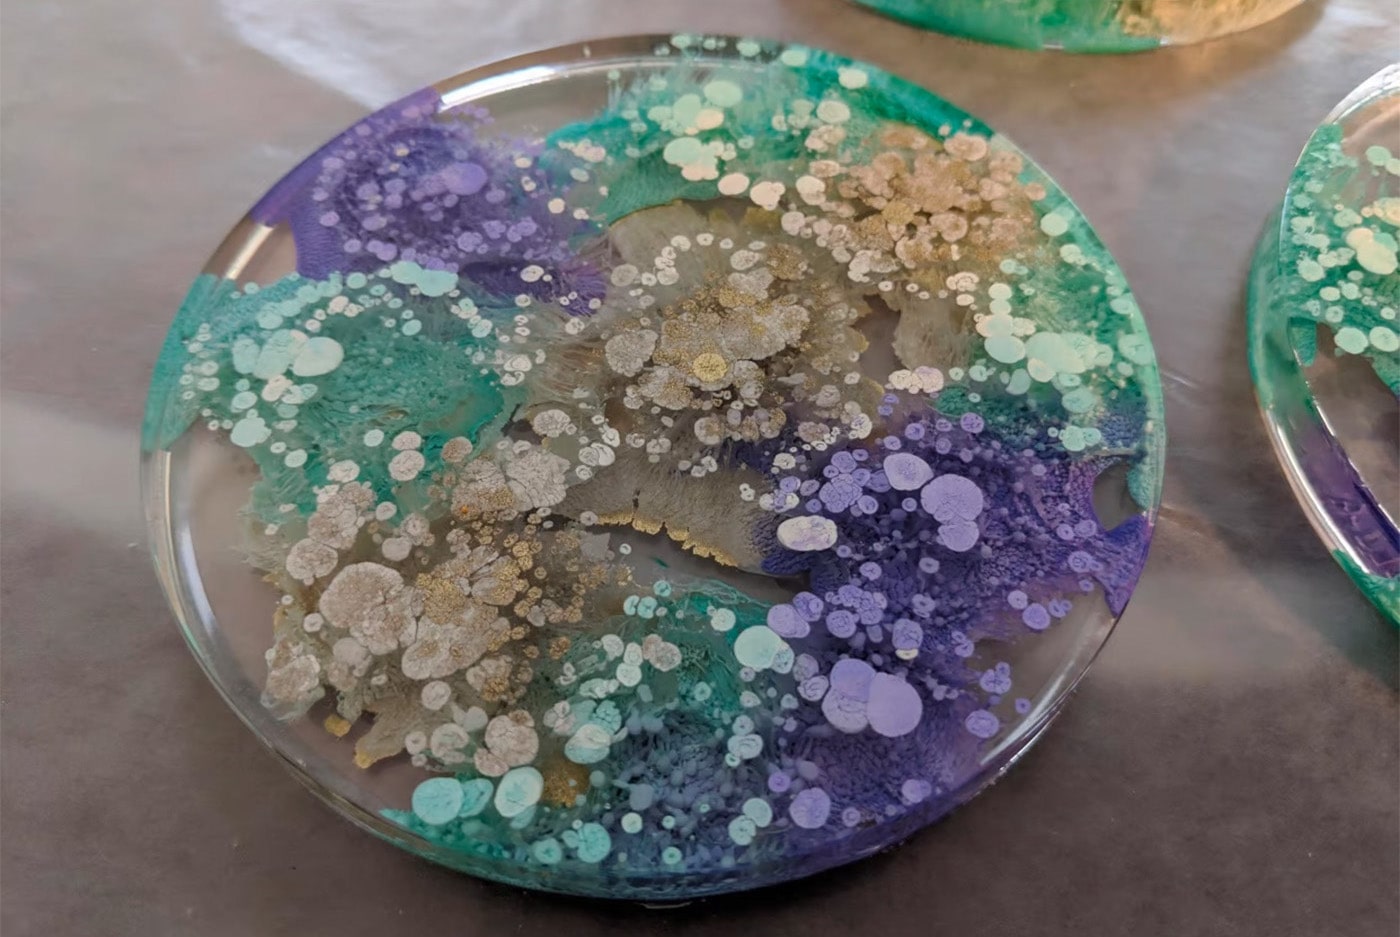 Resin coaster with paint blobs in it. Paint is purple, gold, and green.